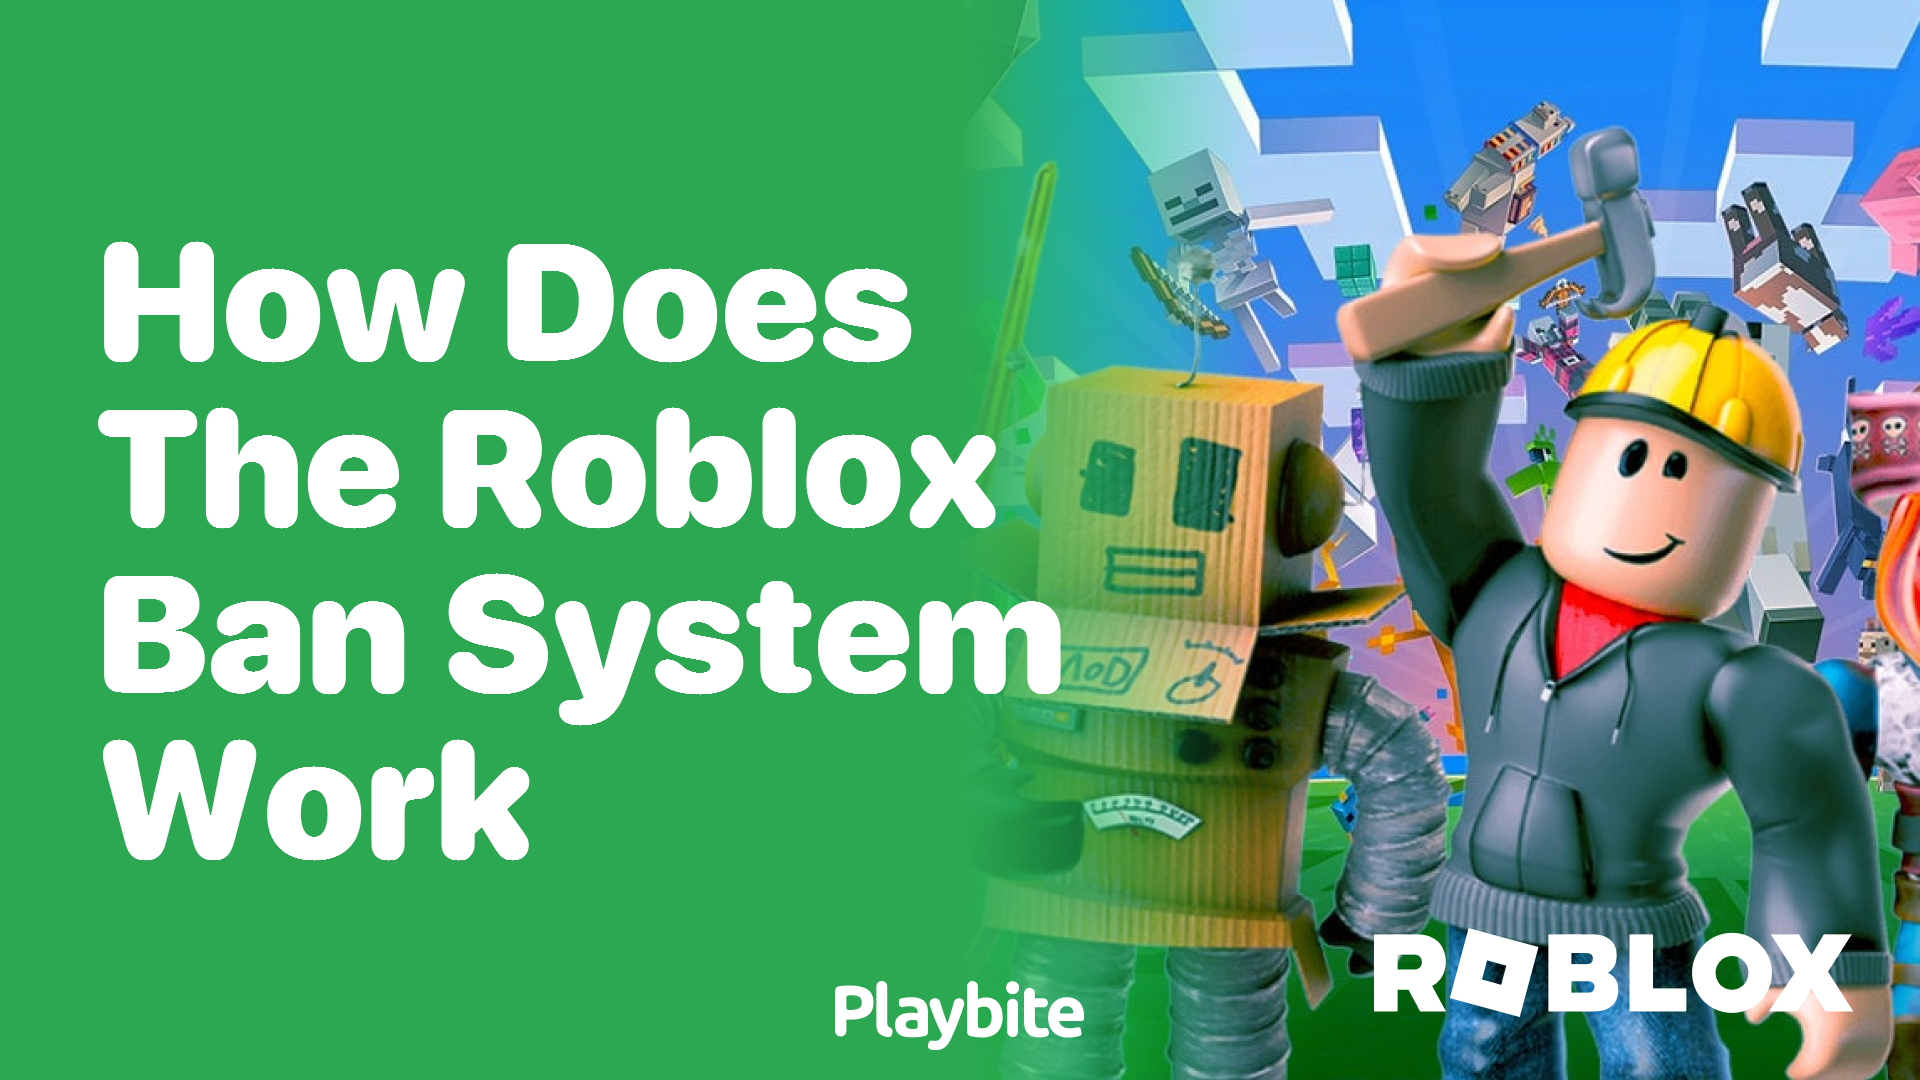 How Does the Roblox Ban System Work?